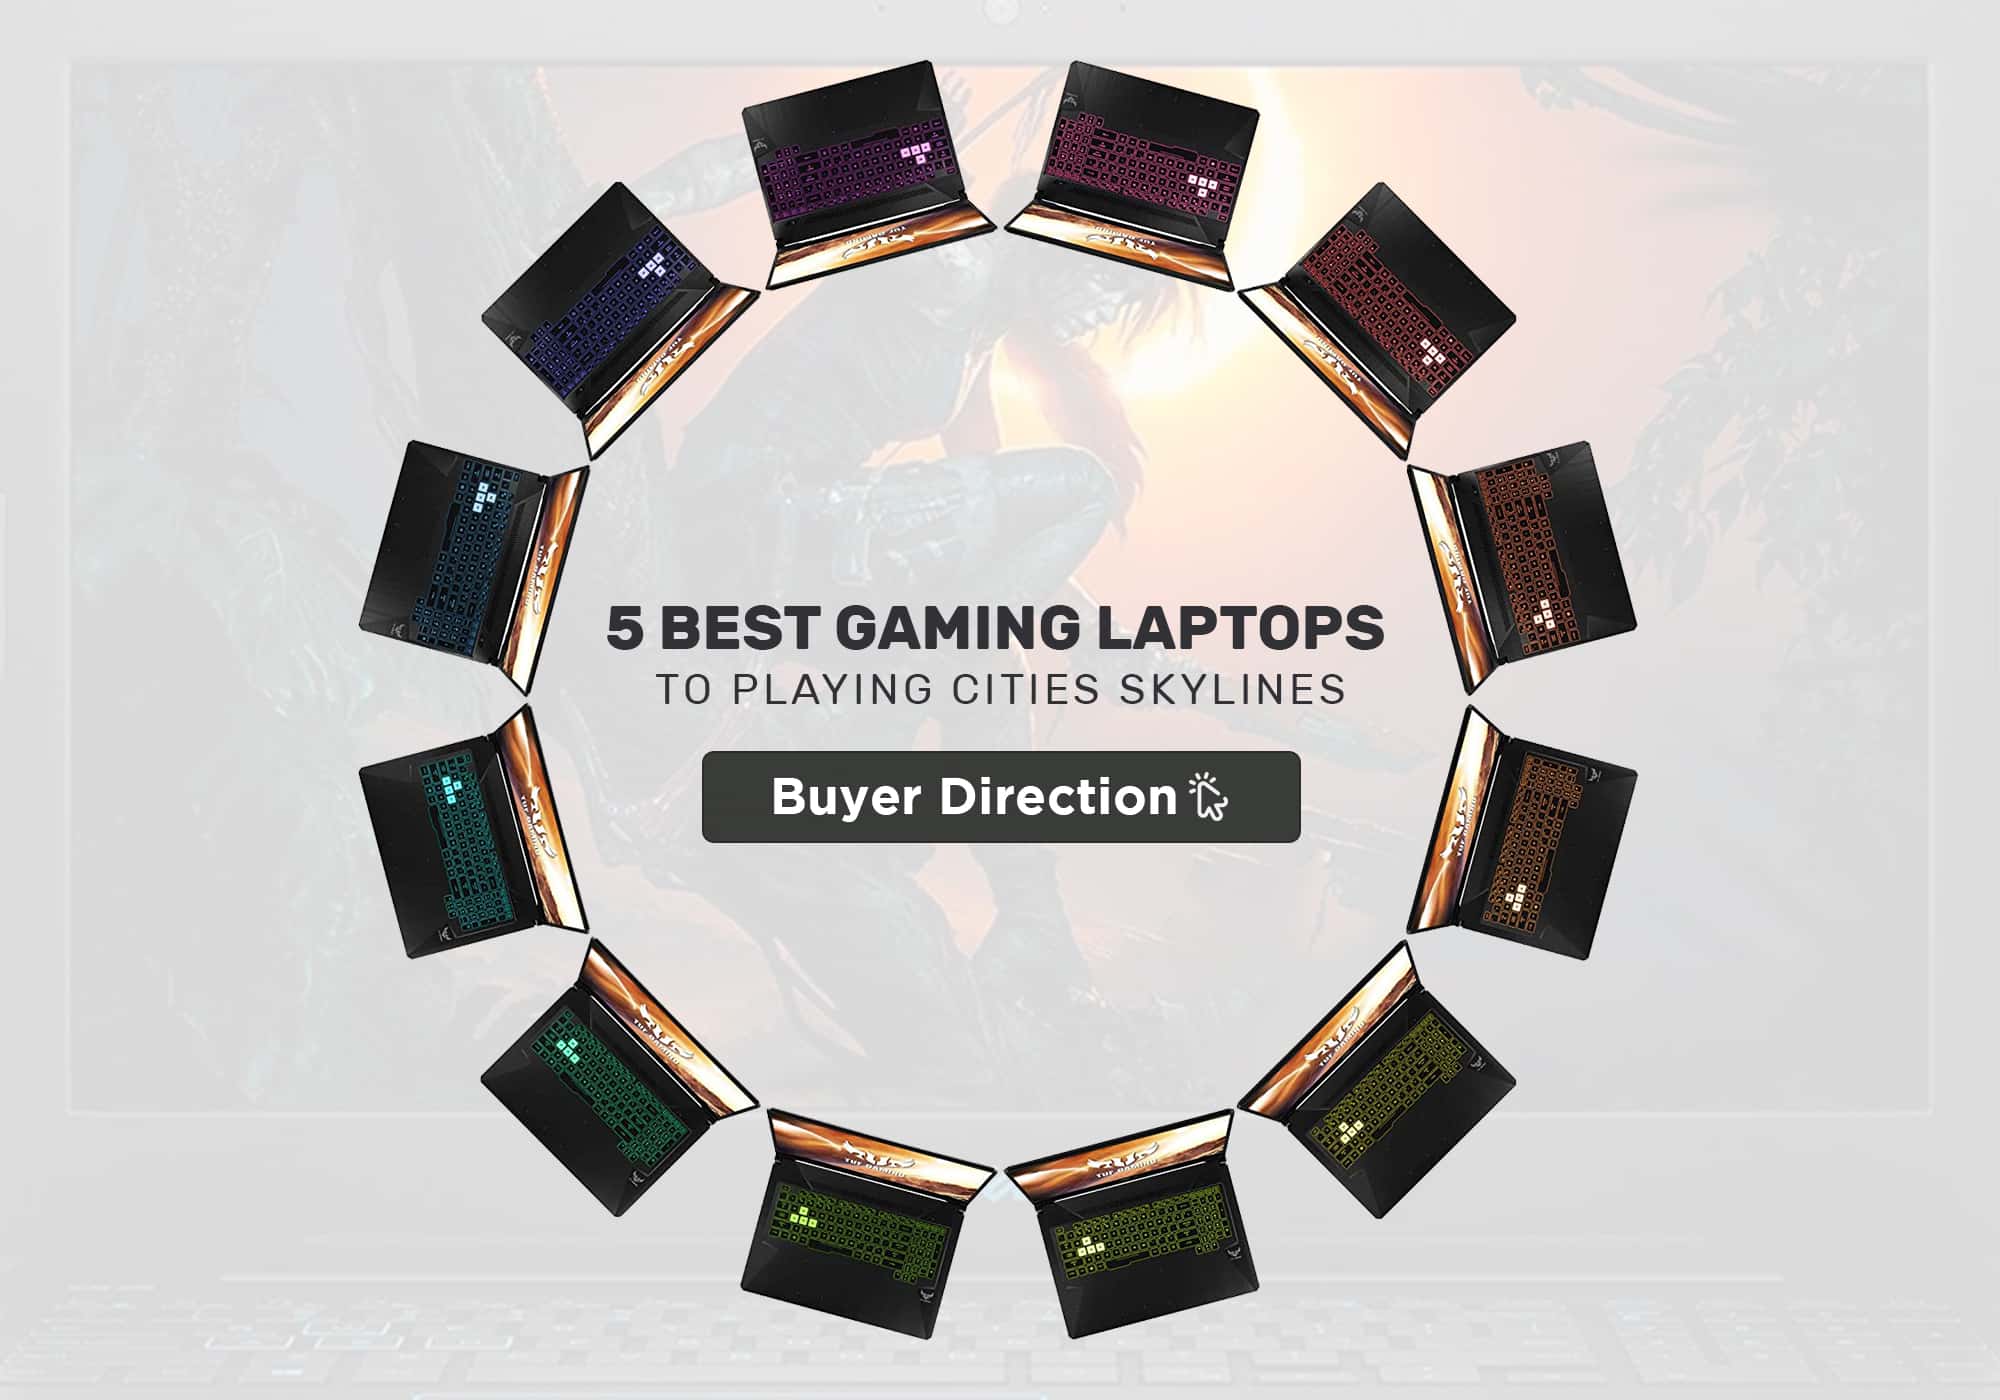 5 Best Gaming Laptops To Playing Cities Skylines